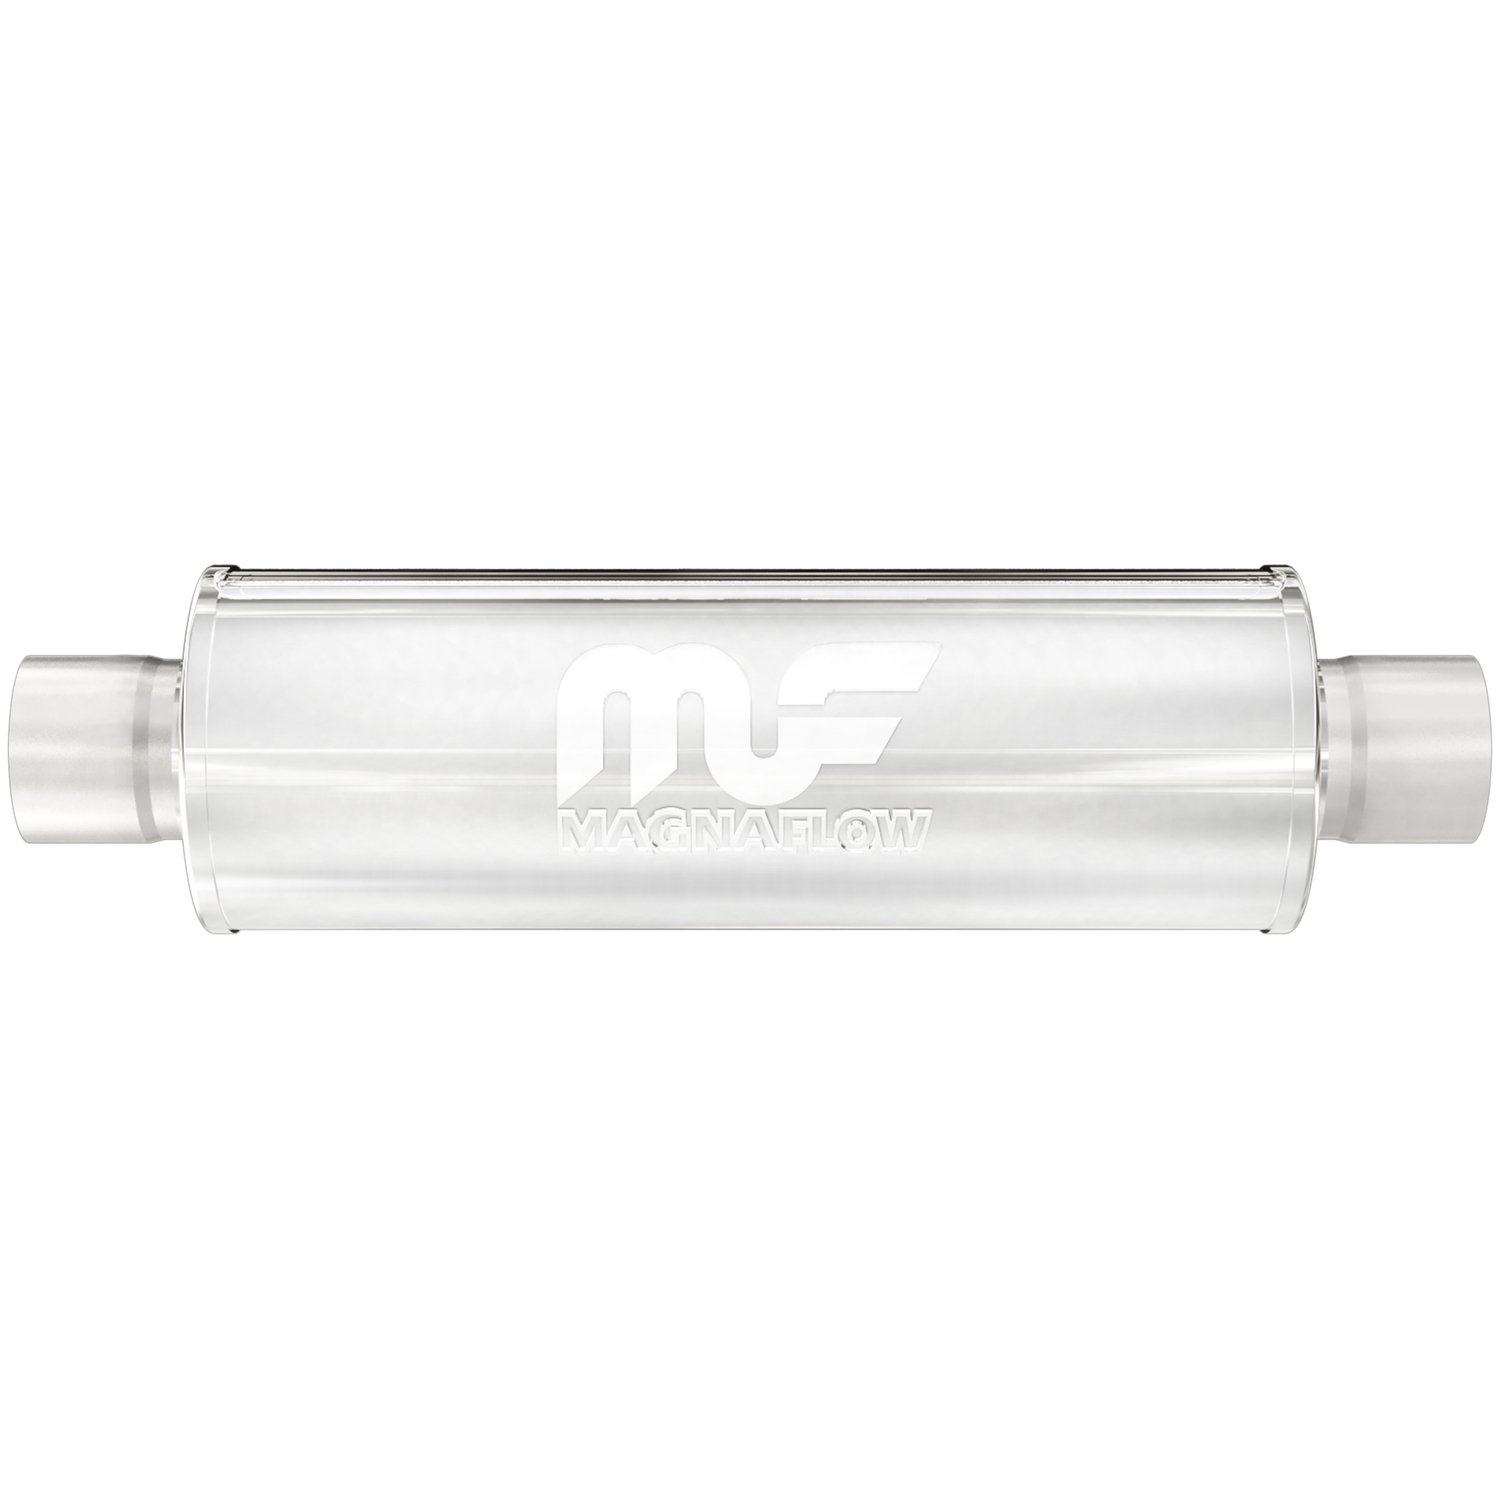 6" Round Muffler Center In/Center Out: 2.5" Body Length: 27" Overall Length: 33" Core Size: 2.5" Satin Finish